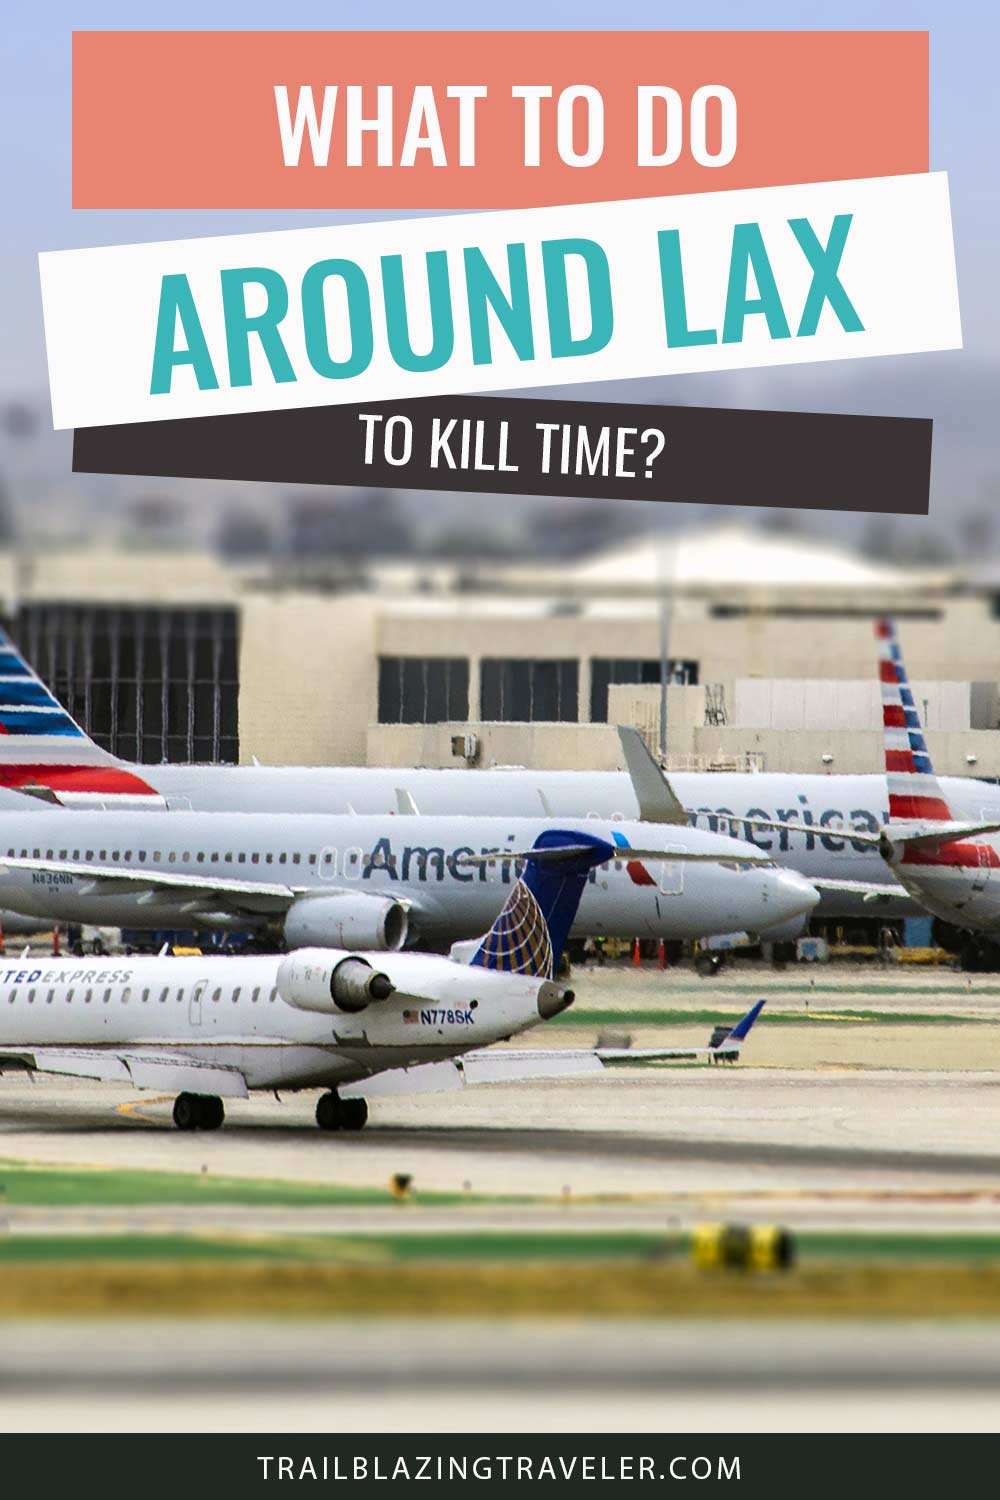 What To Do Around Lax To Kill Time?